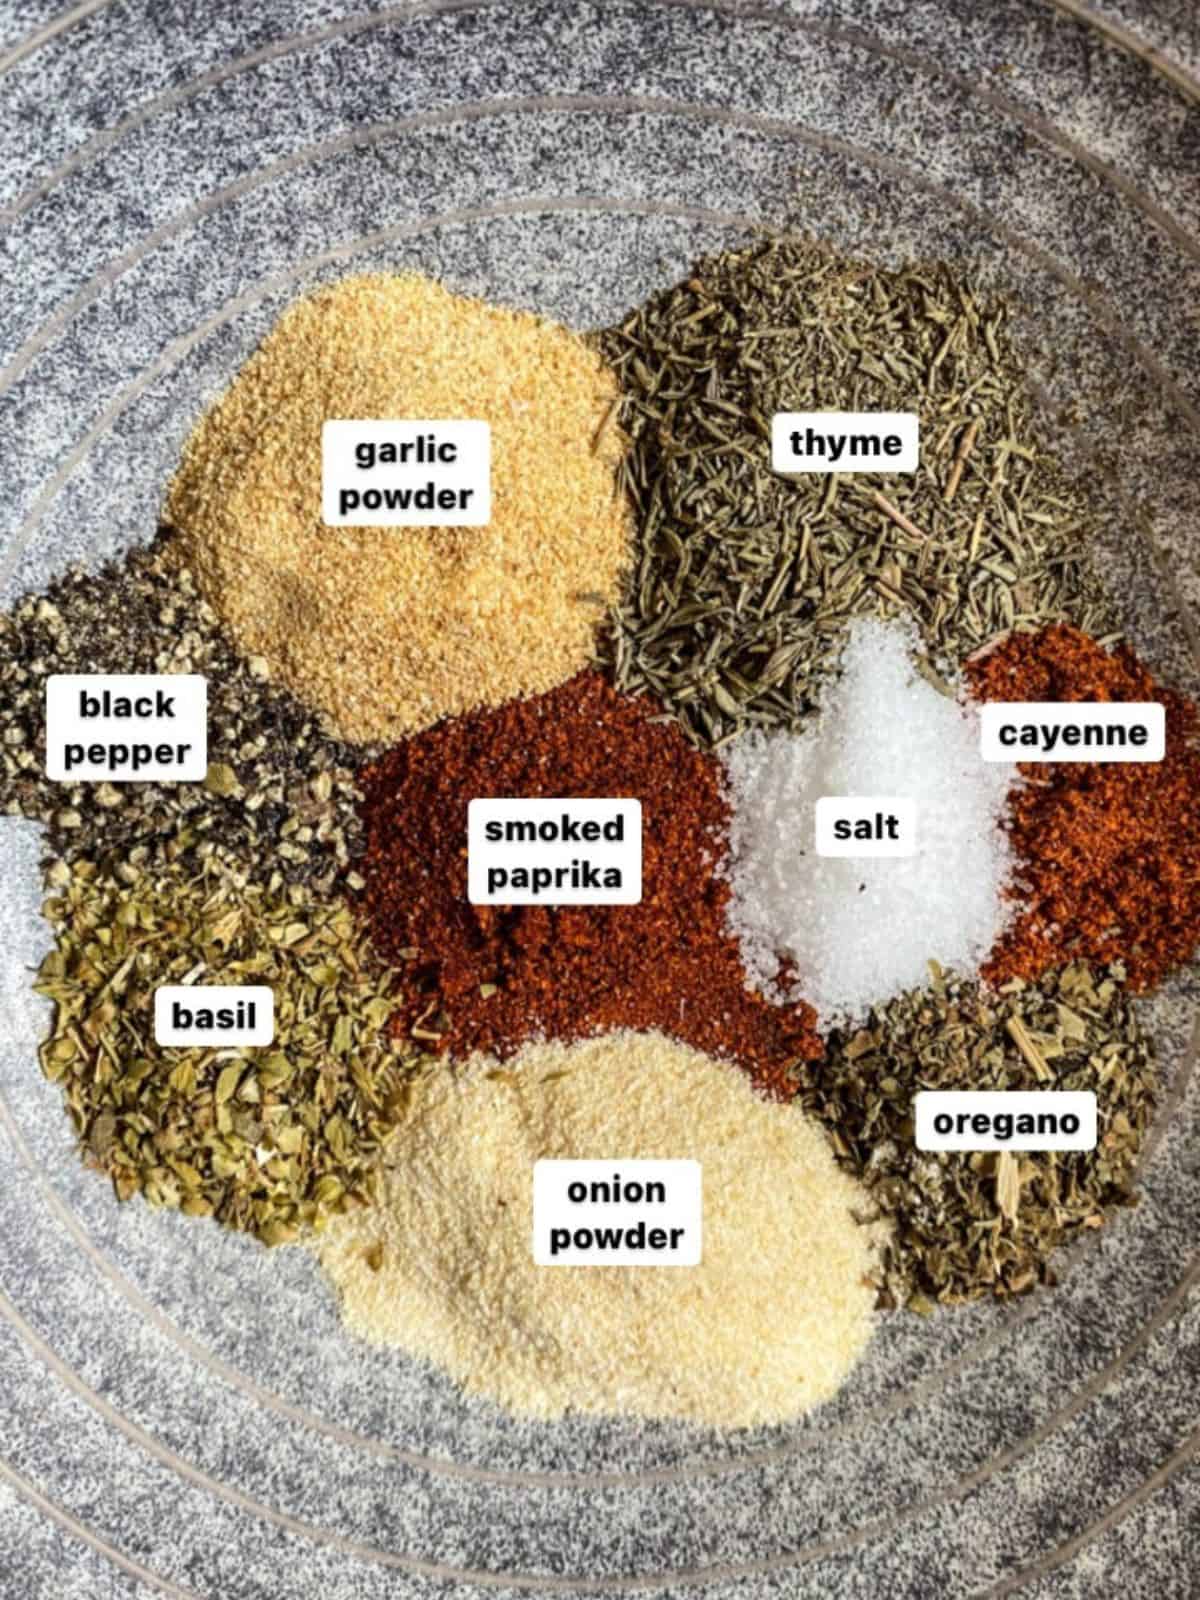 Blackened spices separated in a gray bowl to show each individual spice with each labeled.